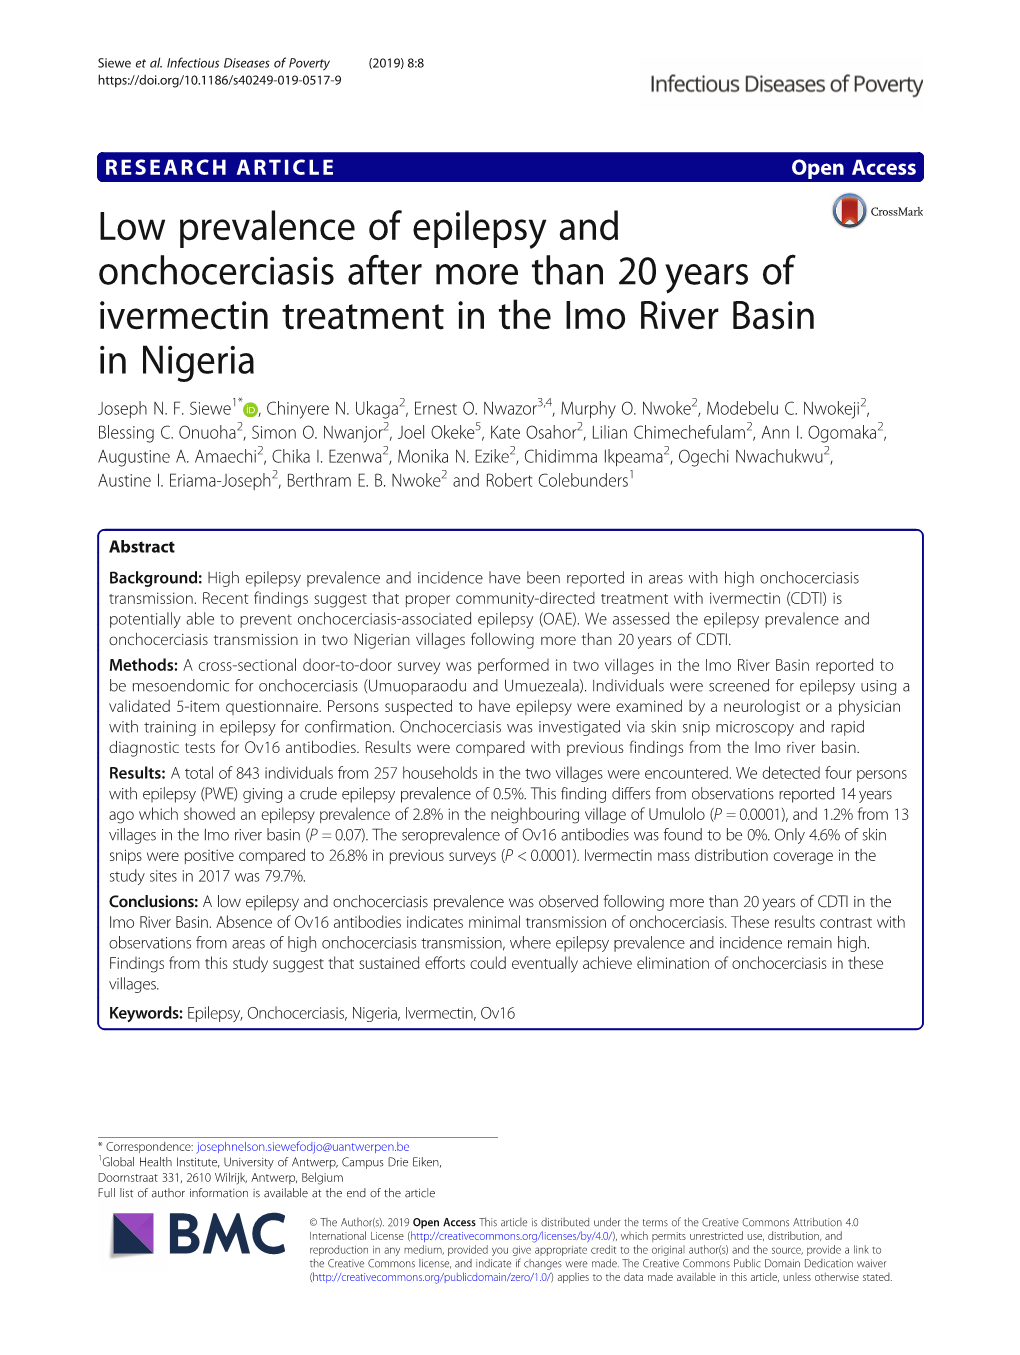 Low Prevalence of Epilepsy and Onchocerciasis After More Than 20 Years of Ivermectin Treatment in the Imo River Basin in Nigeria Joseph N